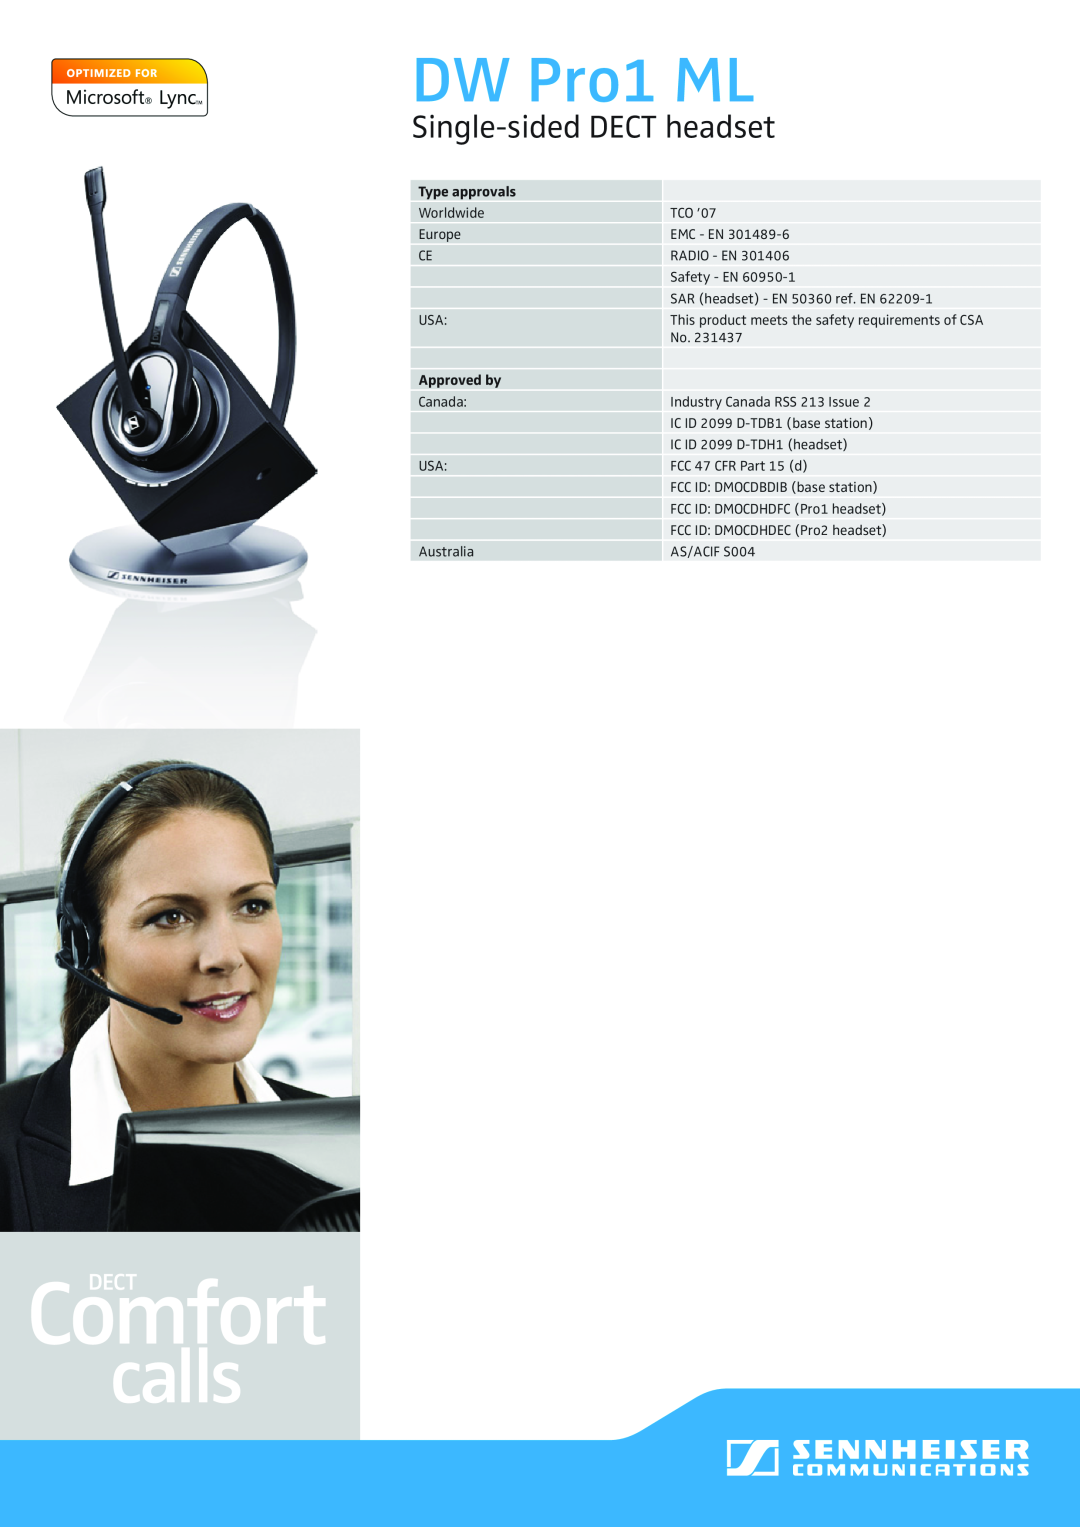 Sennheiser 504461, 504459, 504460, DW PRO1 ML manual DW Pro1 ML, Single-sidedDECT headset, Type approvals, Approved by 